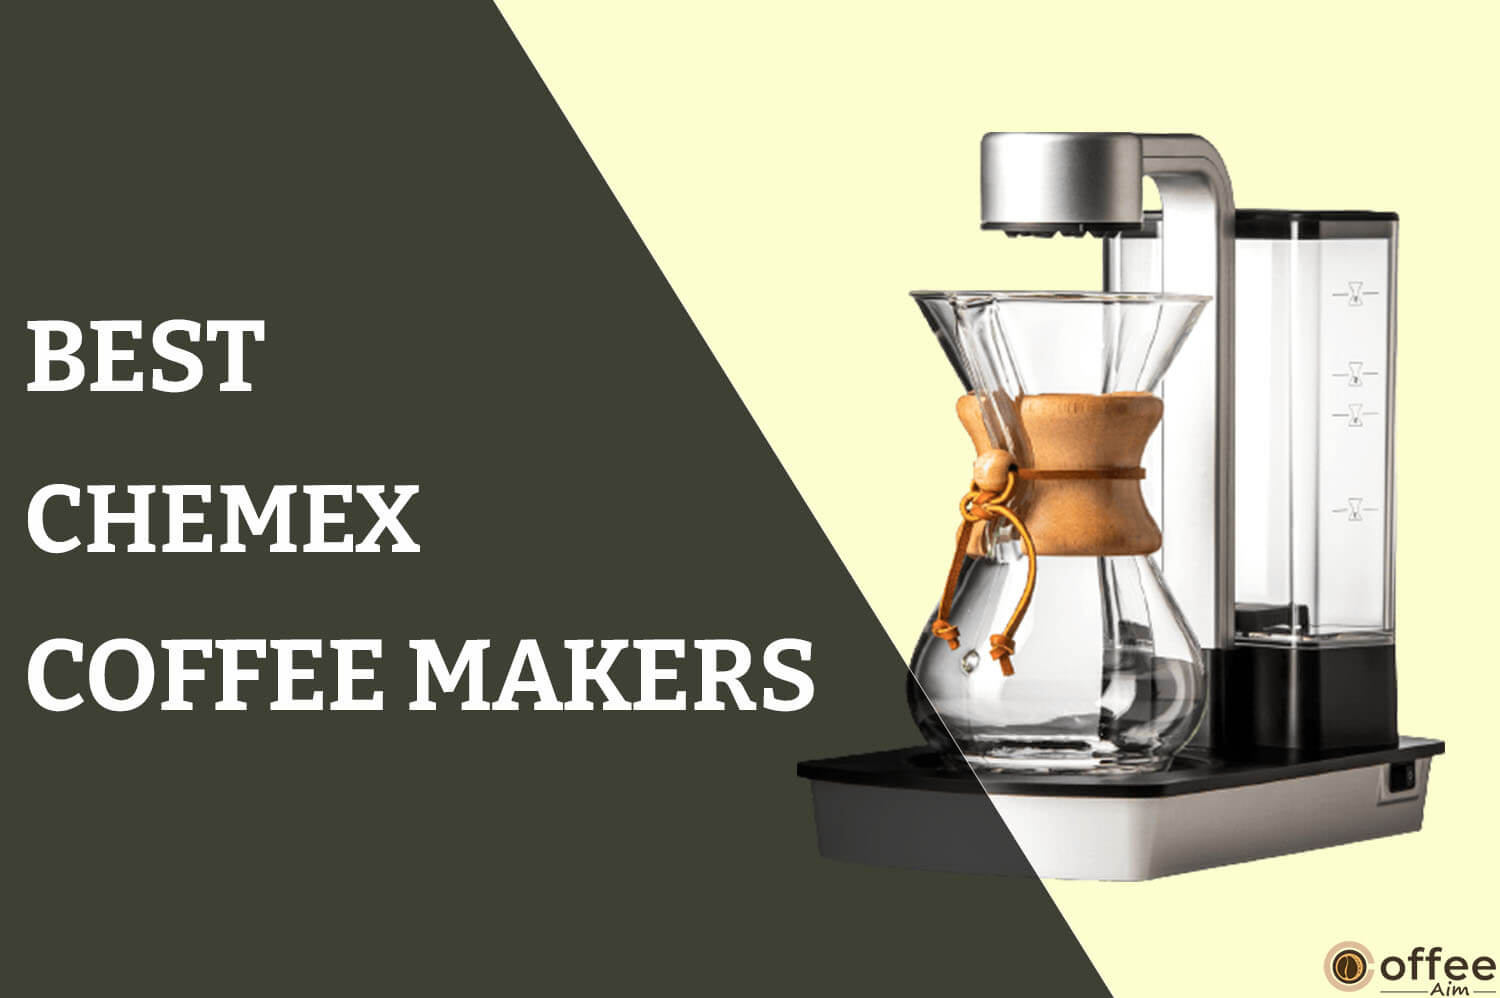 Feature image for the article "Best Chemex Coffee Makers"